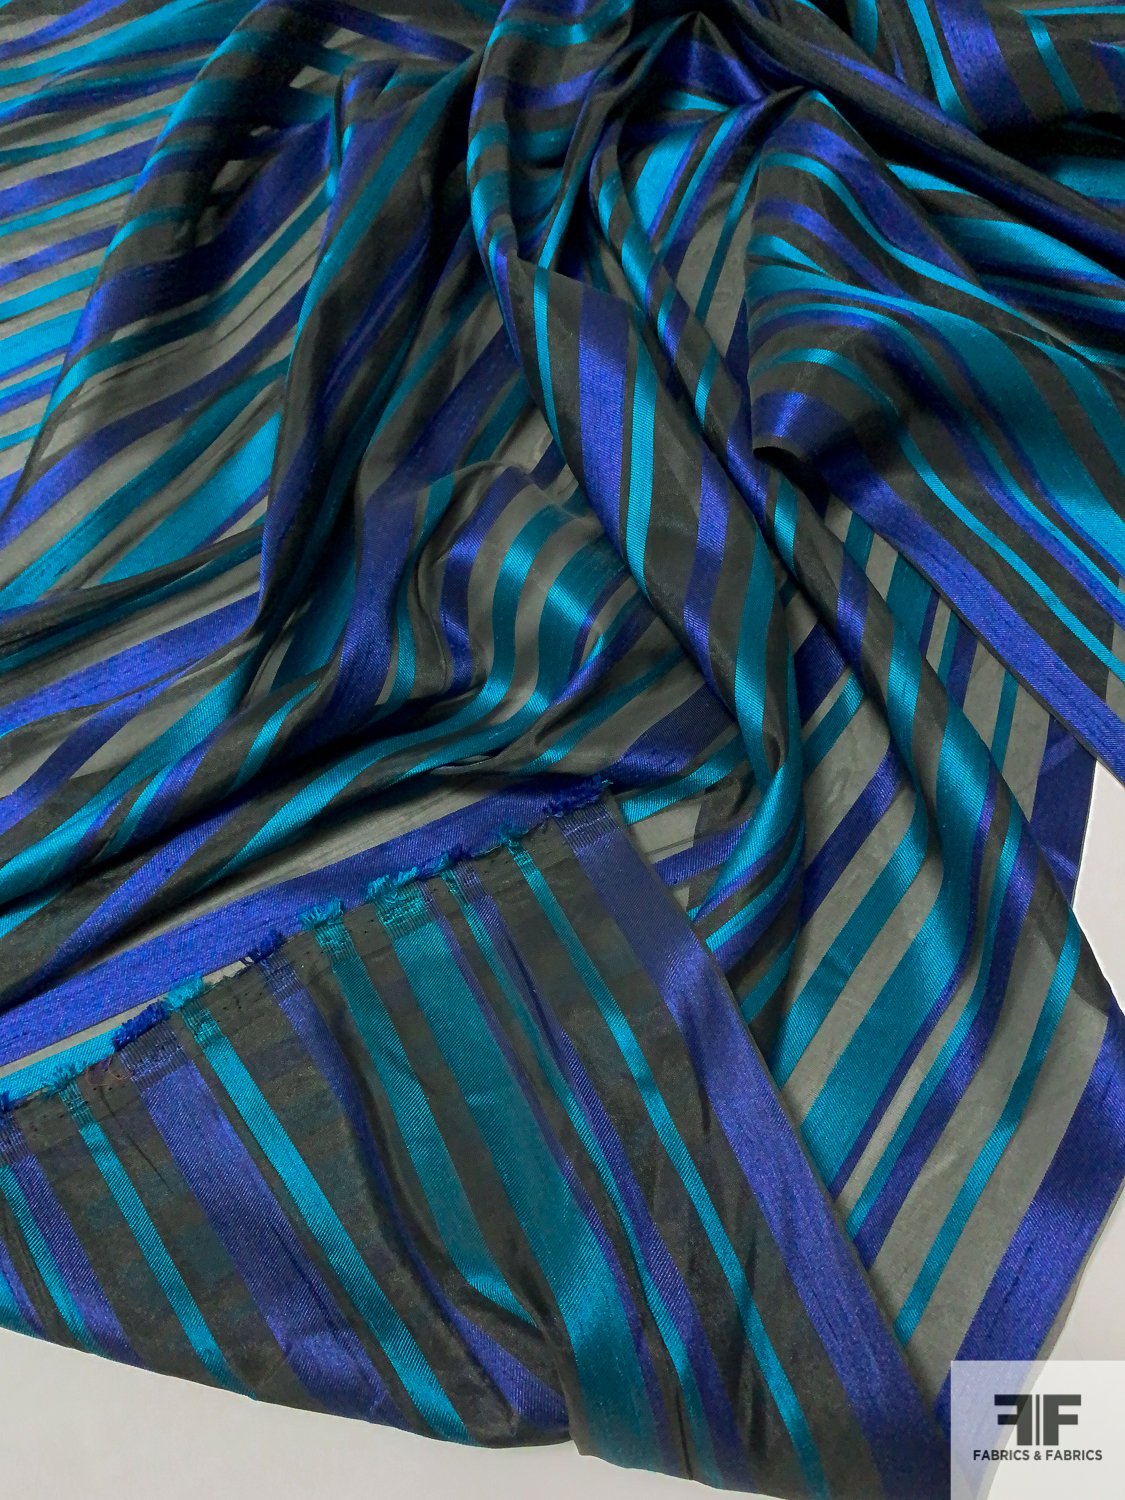 Italian Polyester Organza with Horizontal Twill Striped Design - Teal / Royal / Black